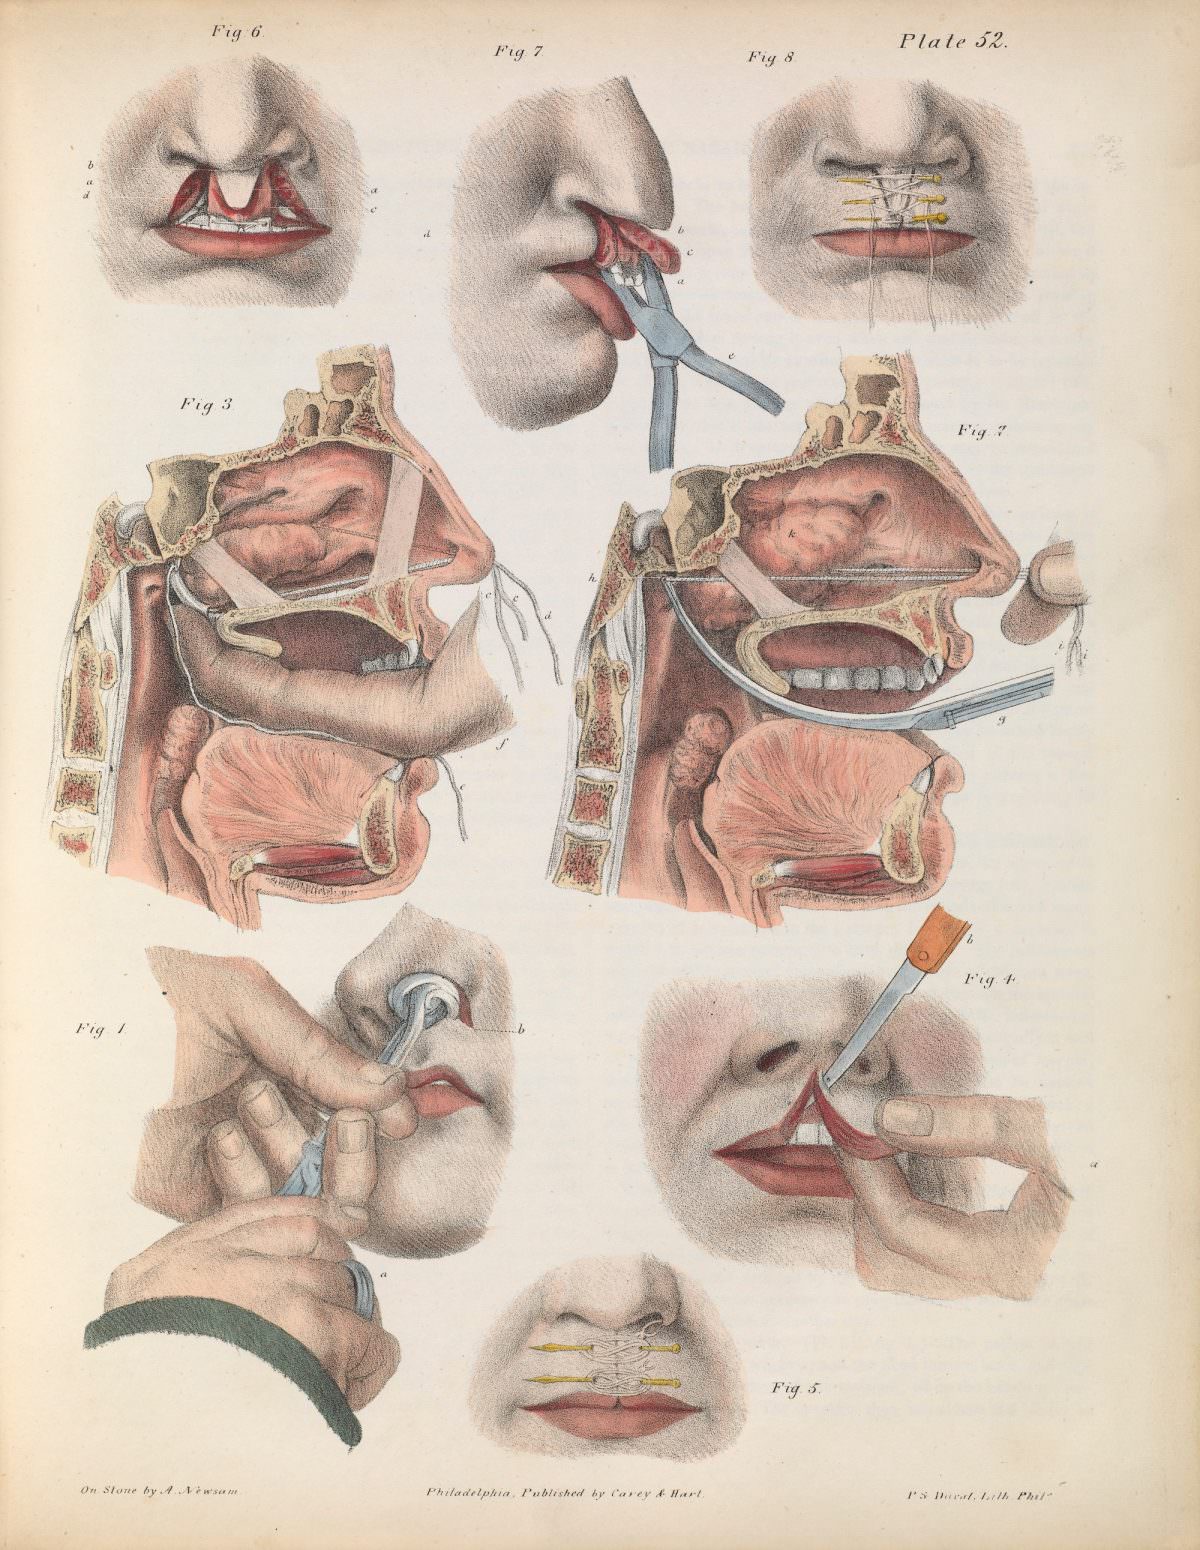 Fig. 1. Removal with the forceps by torsion and traction. Fig. 2, 3. Removal by ligature. Fig. 4,5. Simple hare-lip. Fig. 6, 7, 8. ‘Double hare-lip’ and ‘complicated hare-lip’.